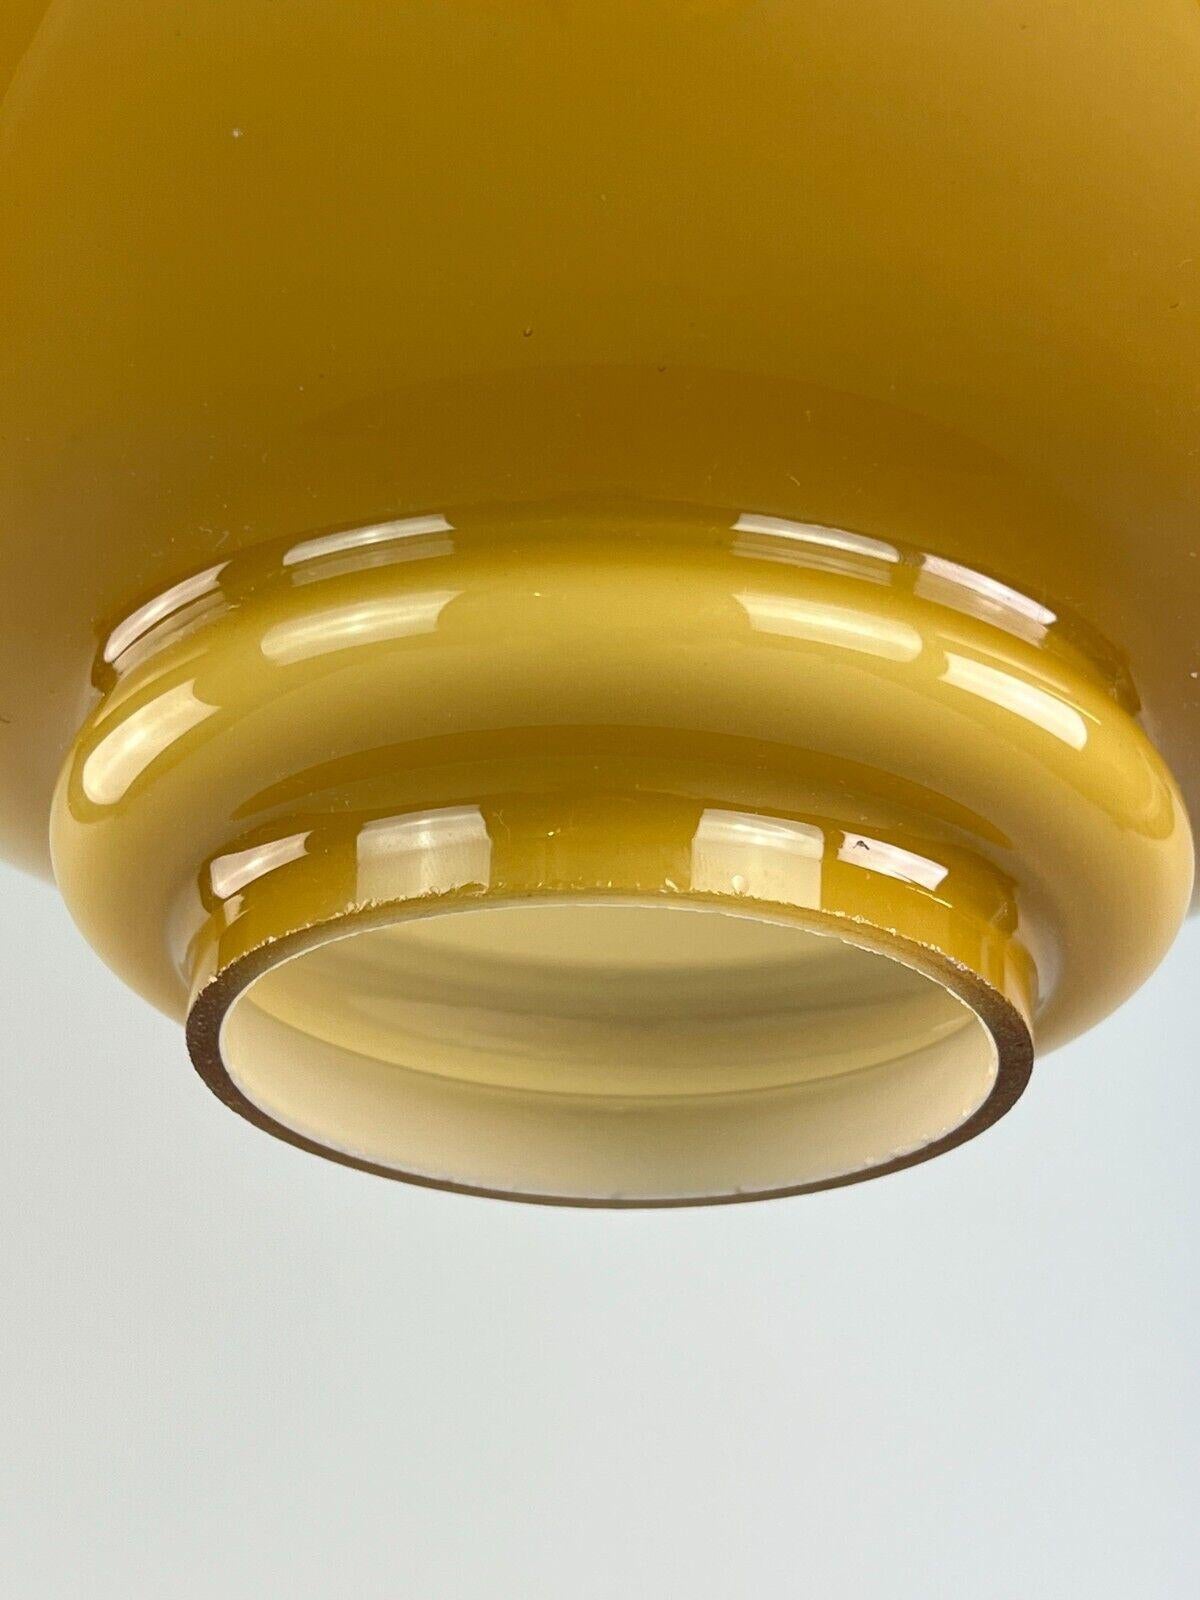 60s 70s Lamp Light Hanging Lamp Hans Agne Jakobsson for Staff Mustard Yellow For Sale 2